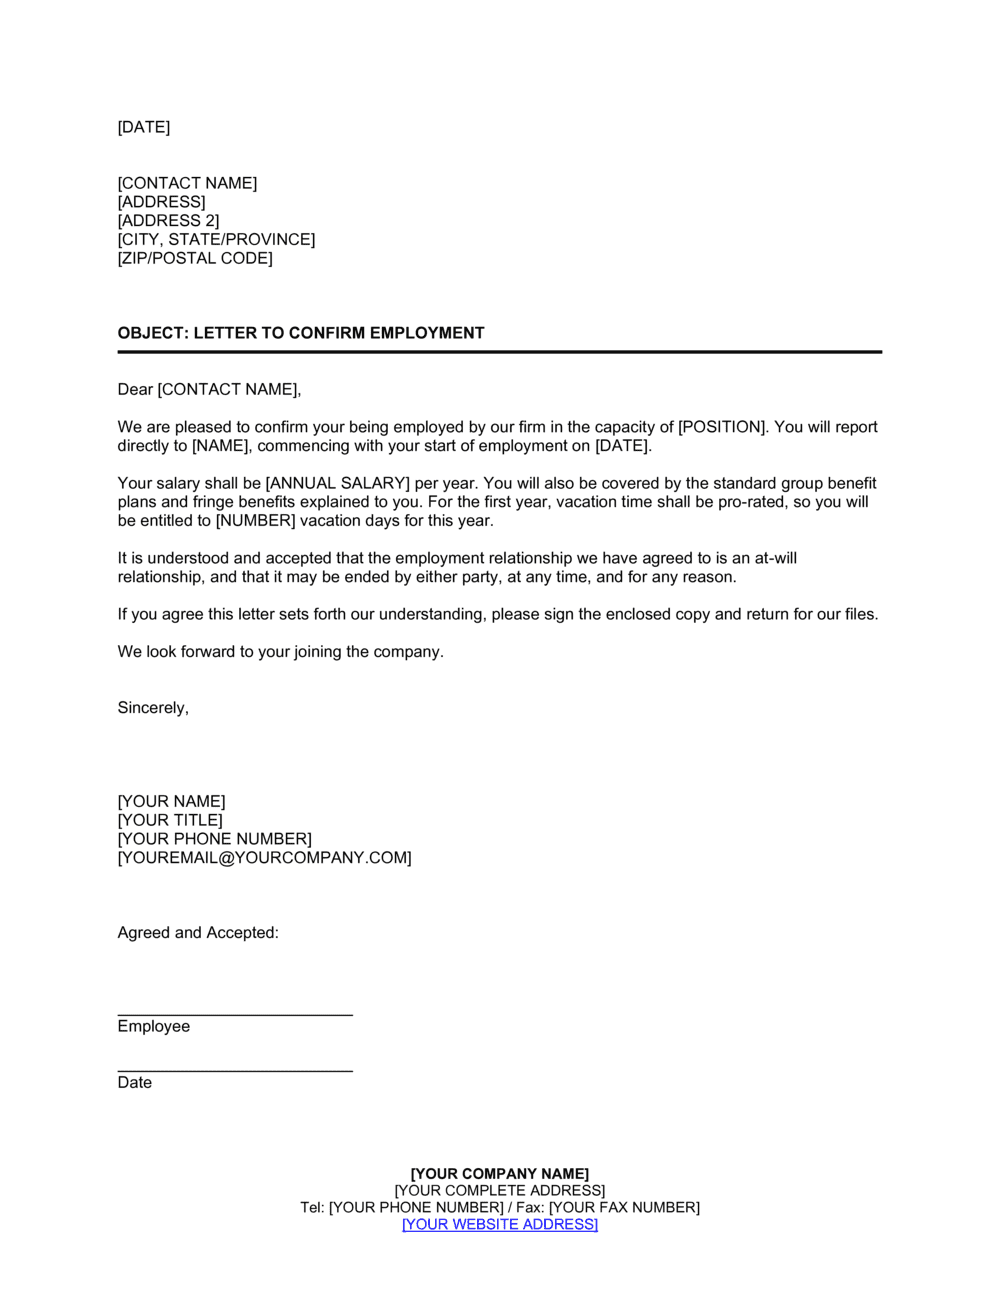 Sample Letter From Part Time To Full Time Position from templates.business-in-a-box.com